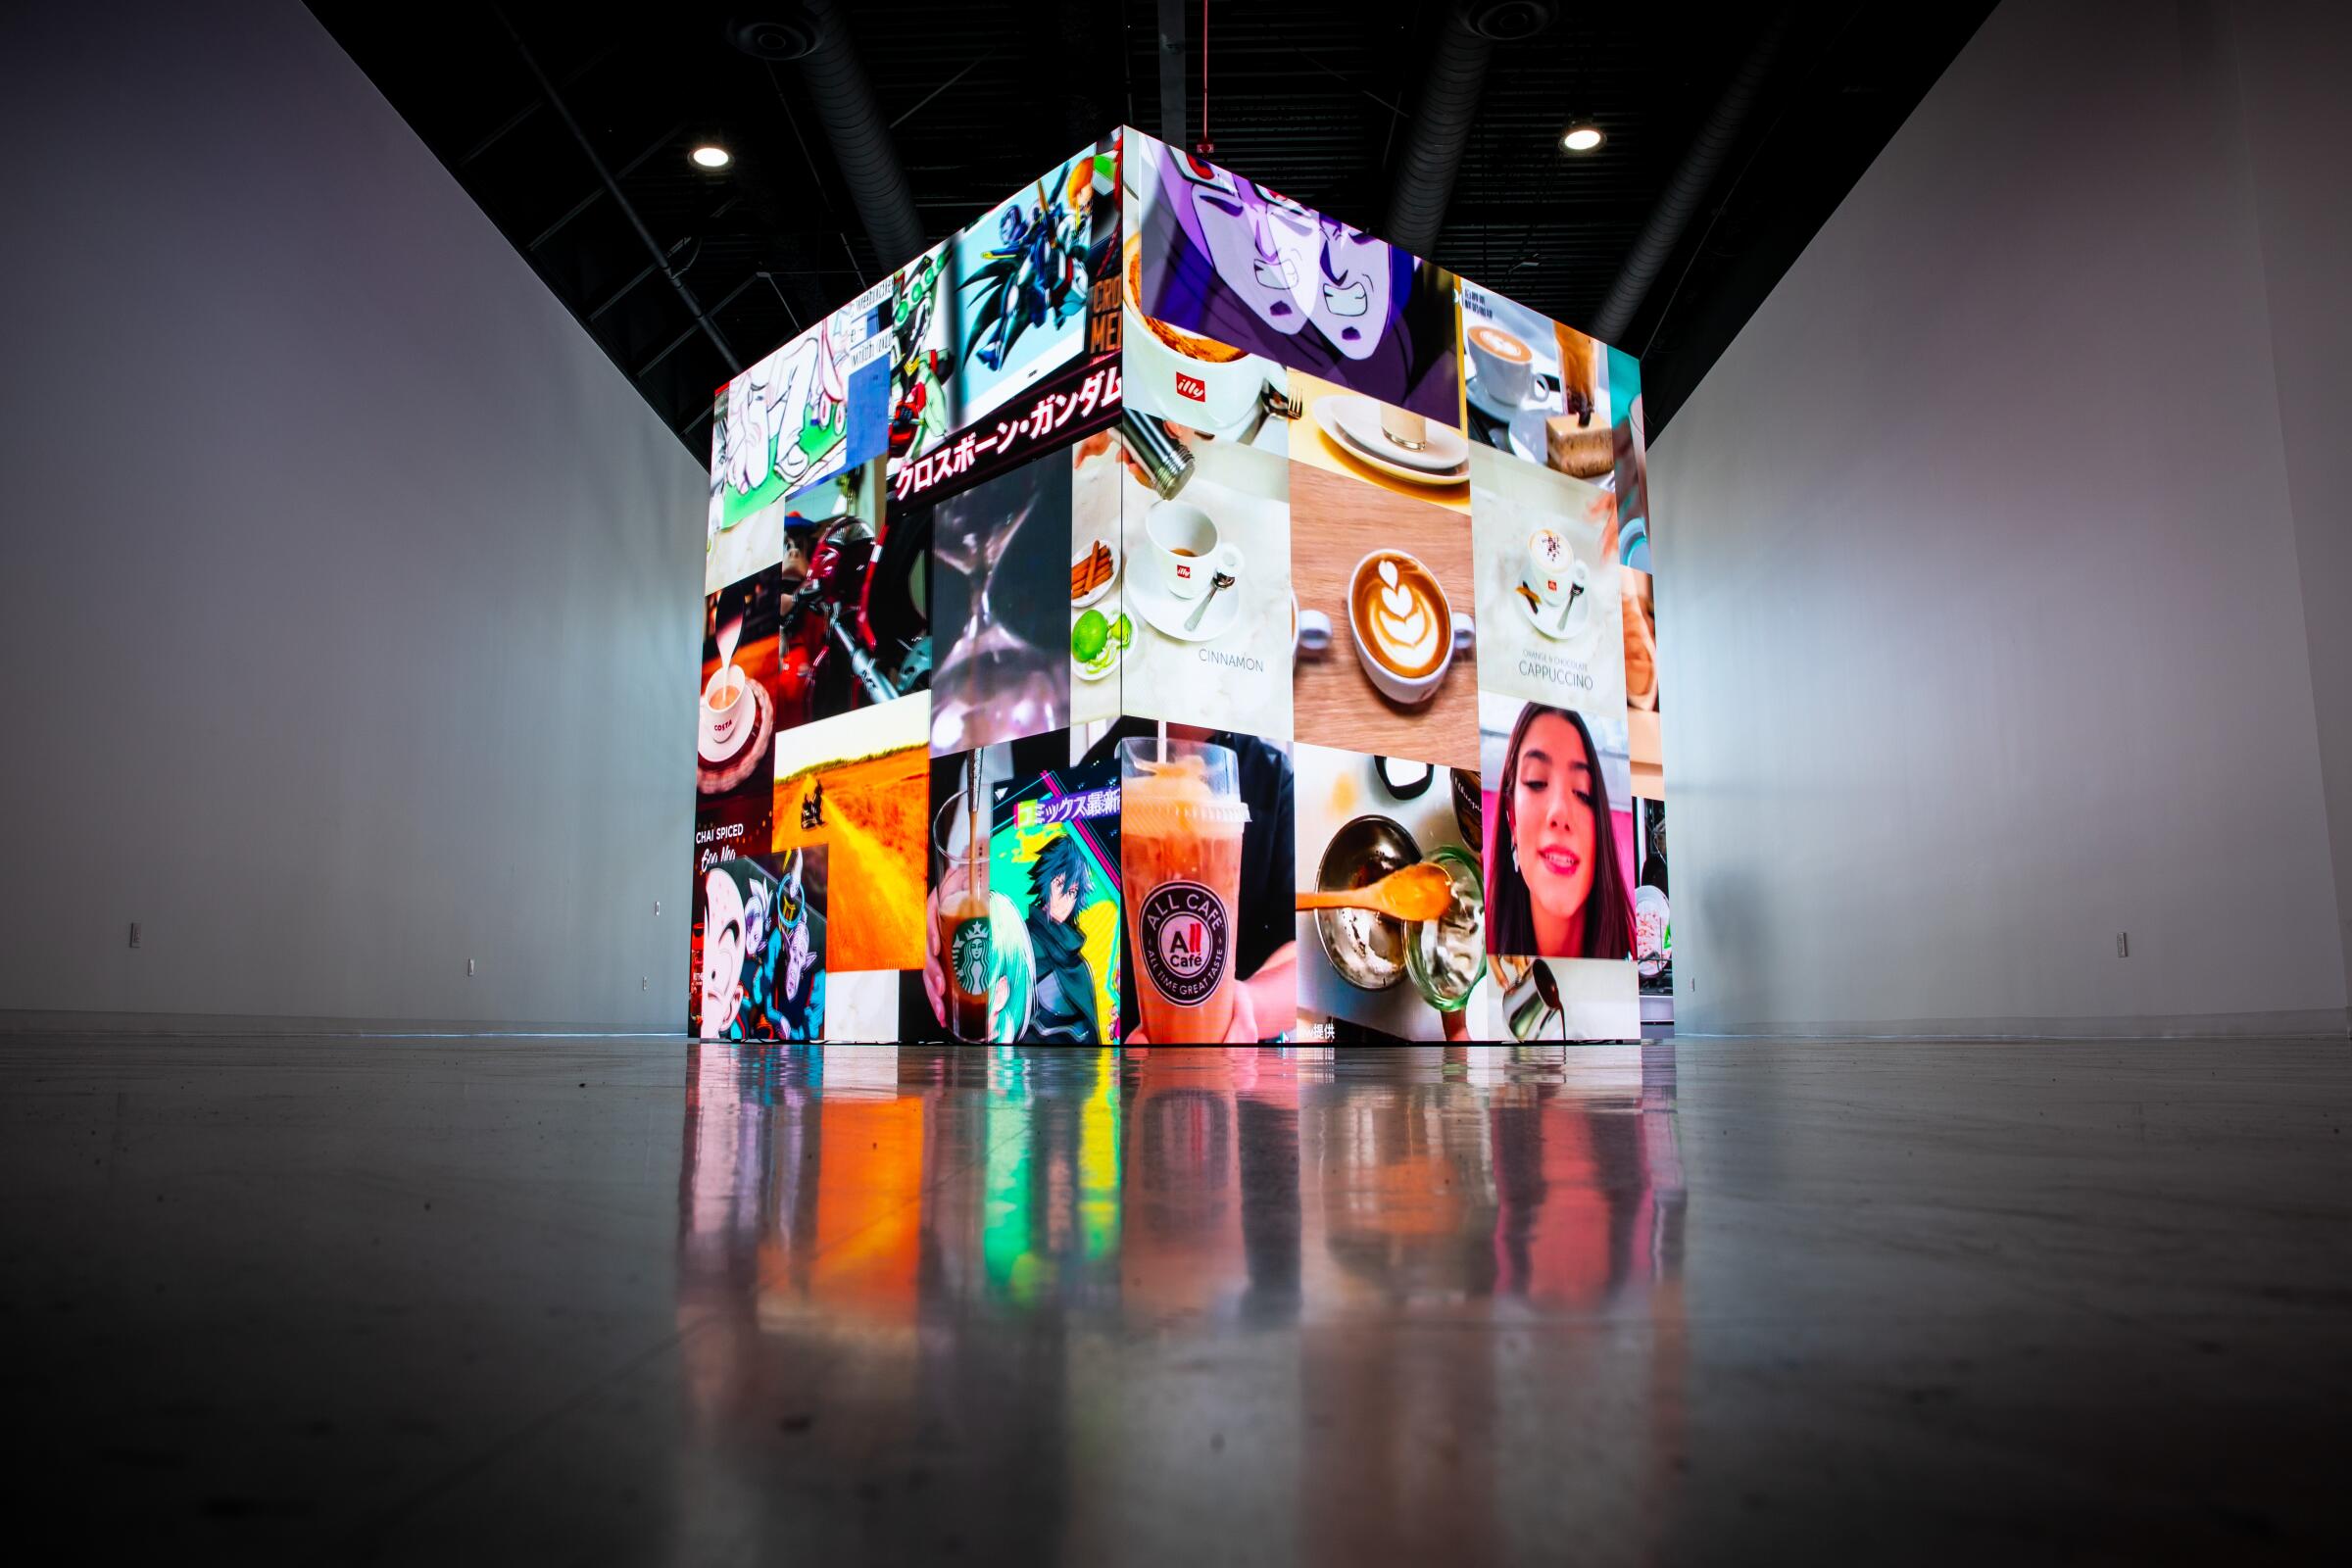 An art installation of a cube with advertisements